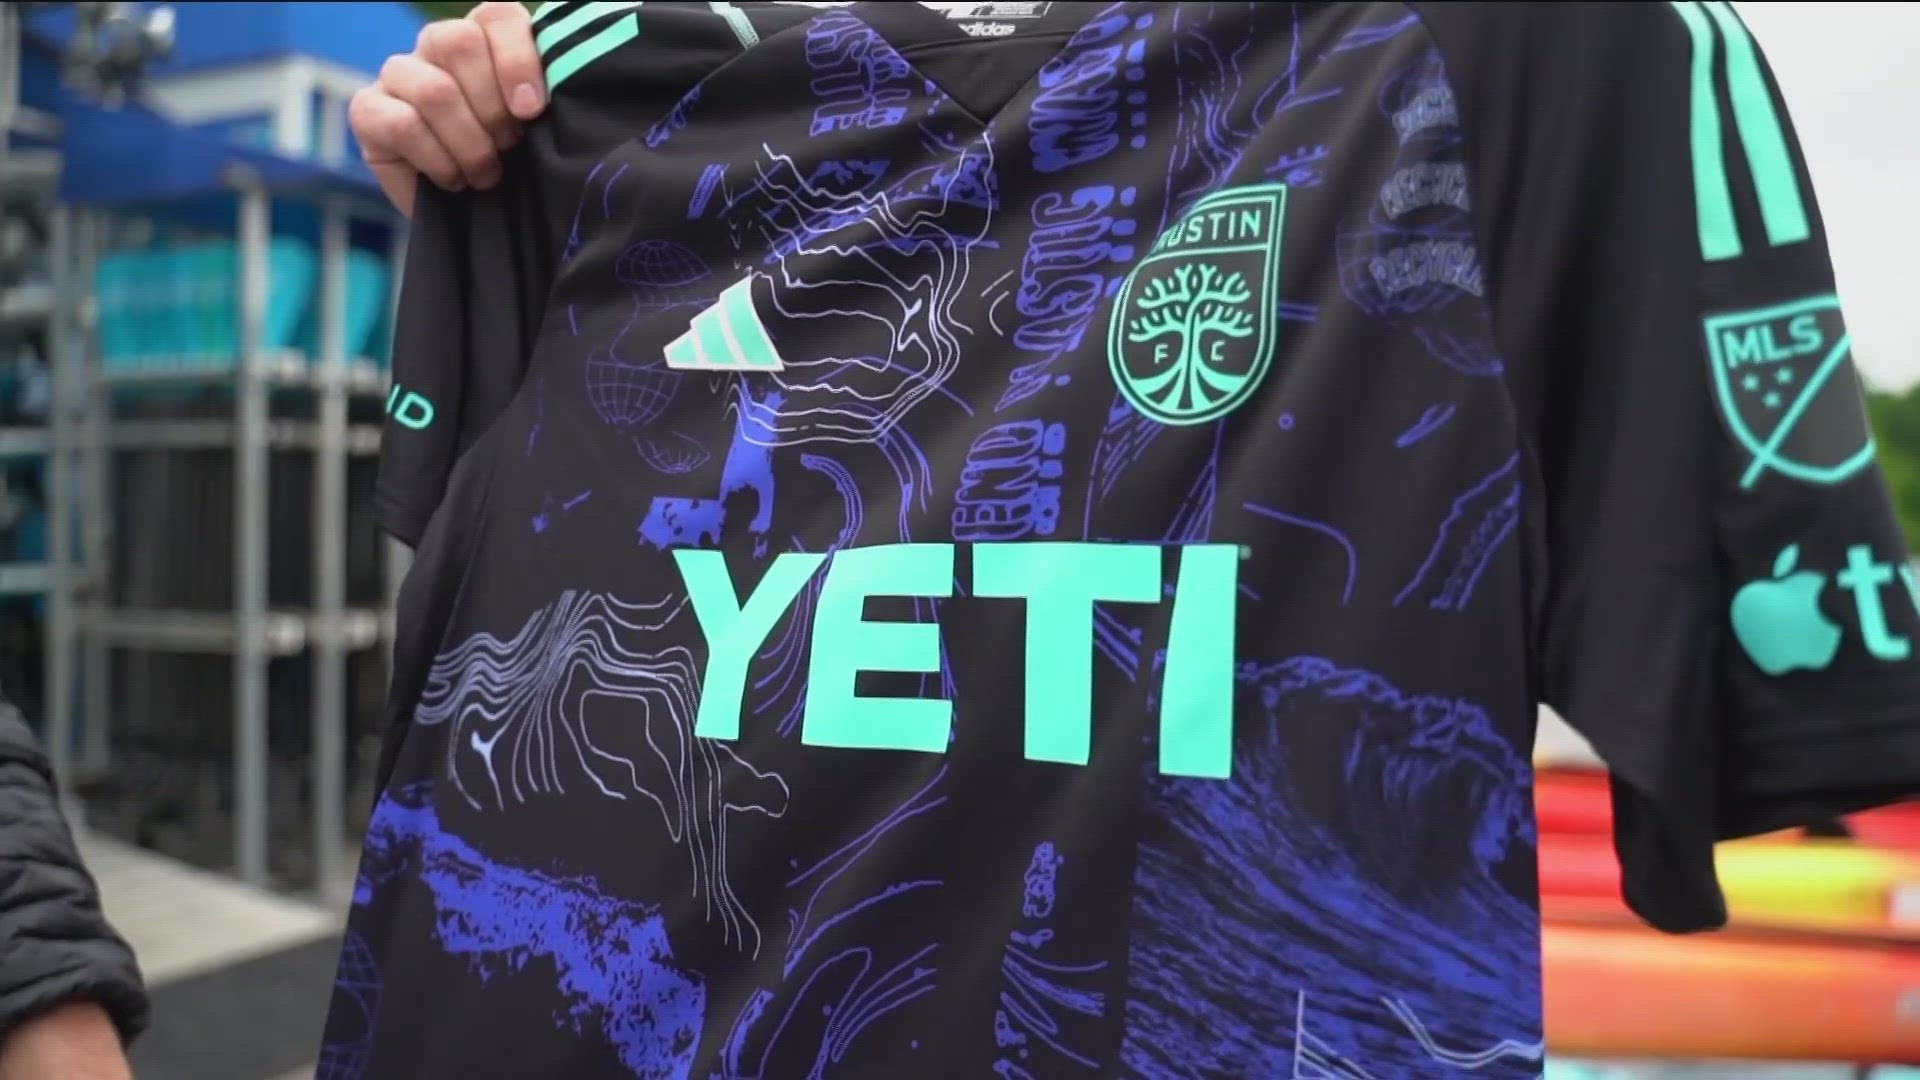 Austin FC will wear a special jersey on Saturday commemorating Earth Day.